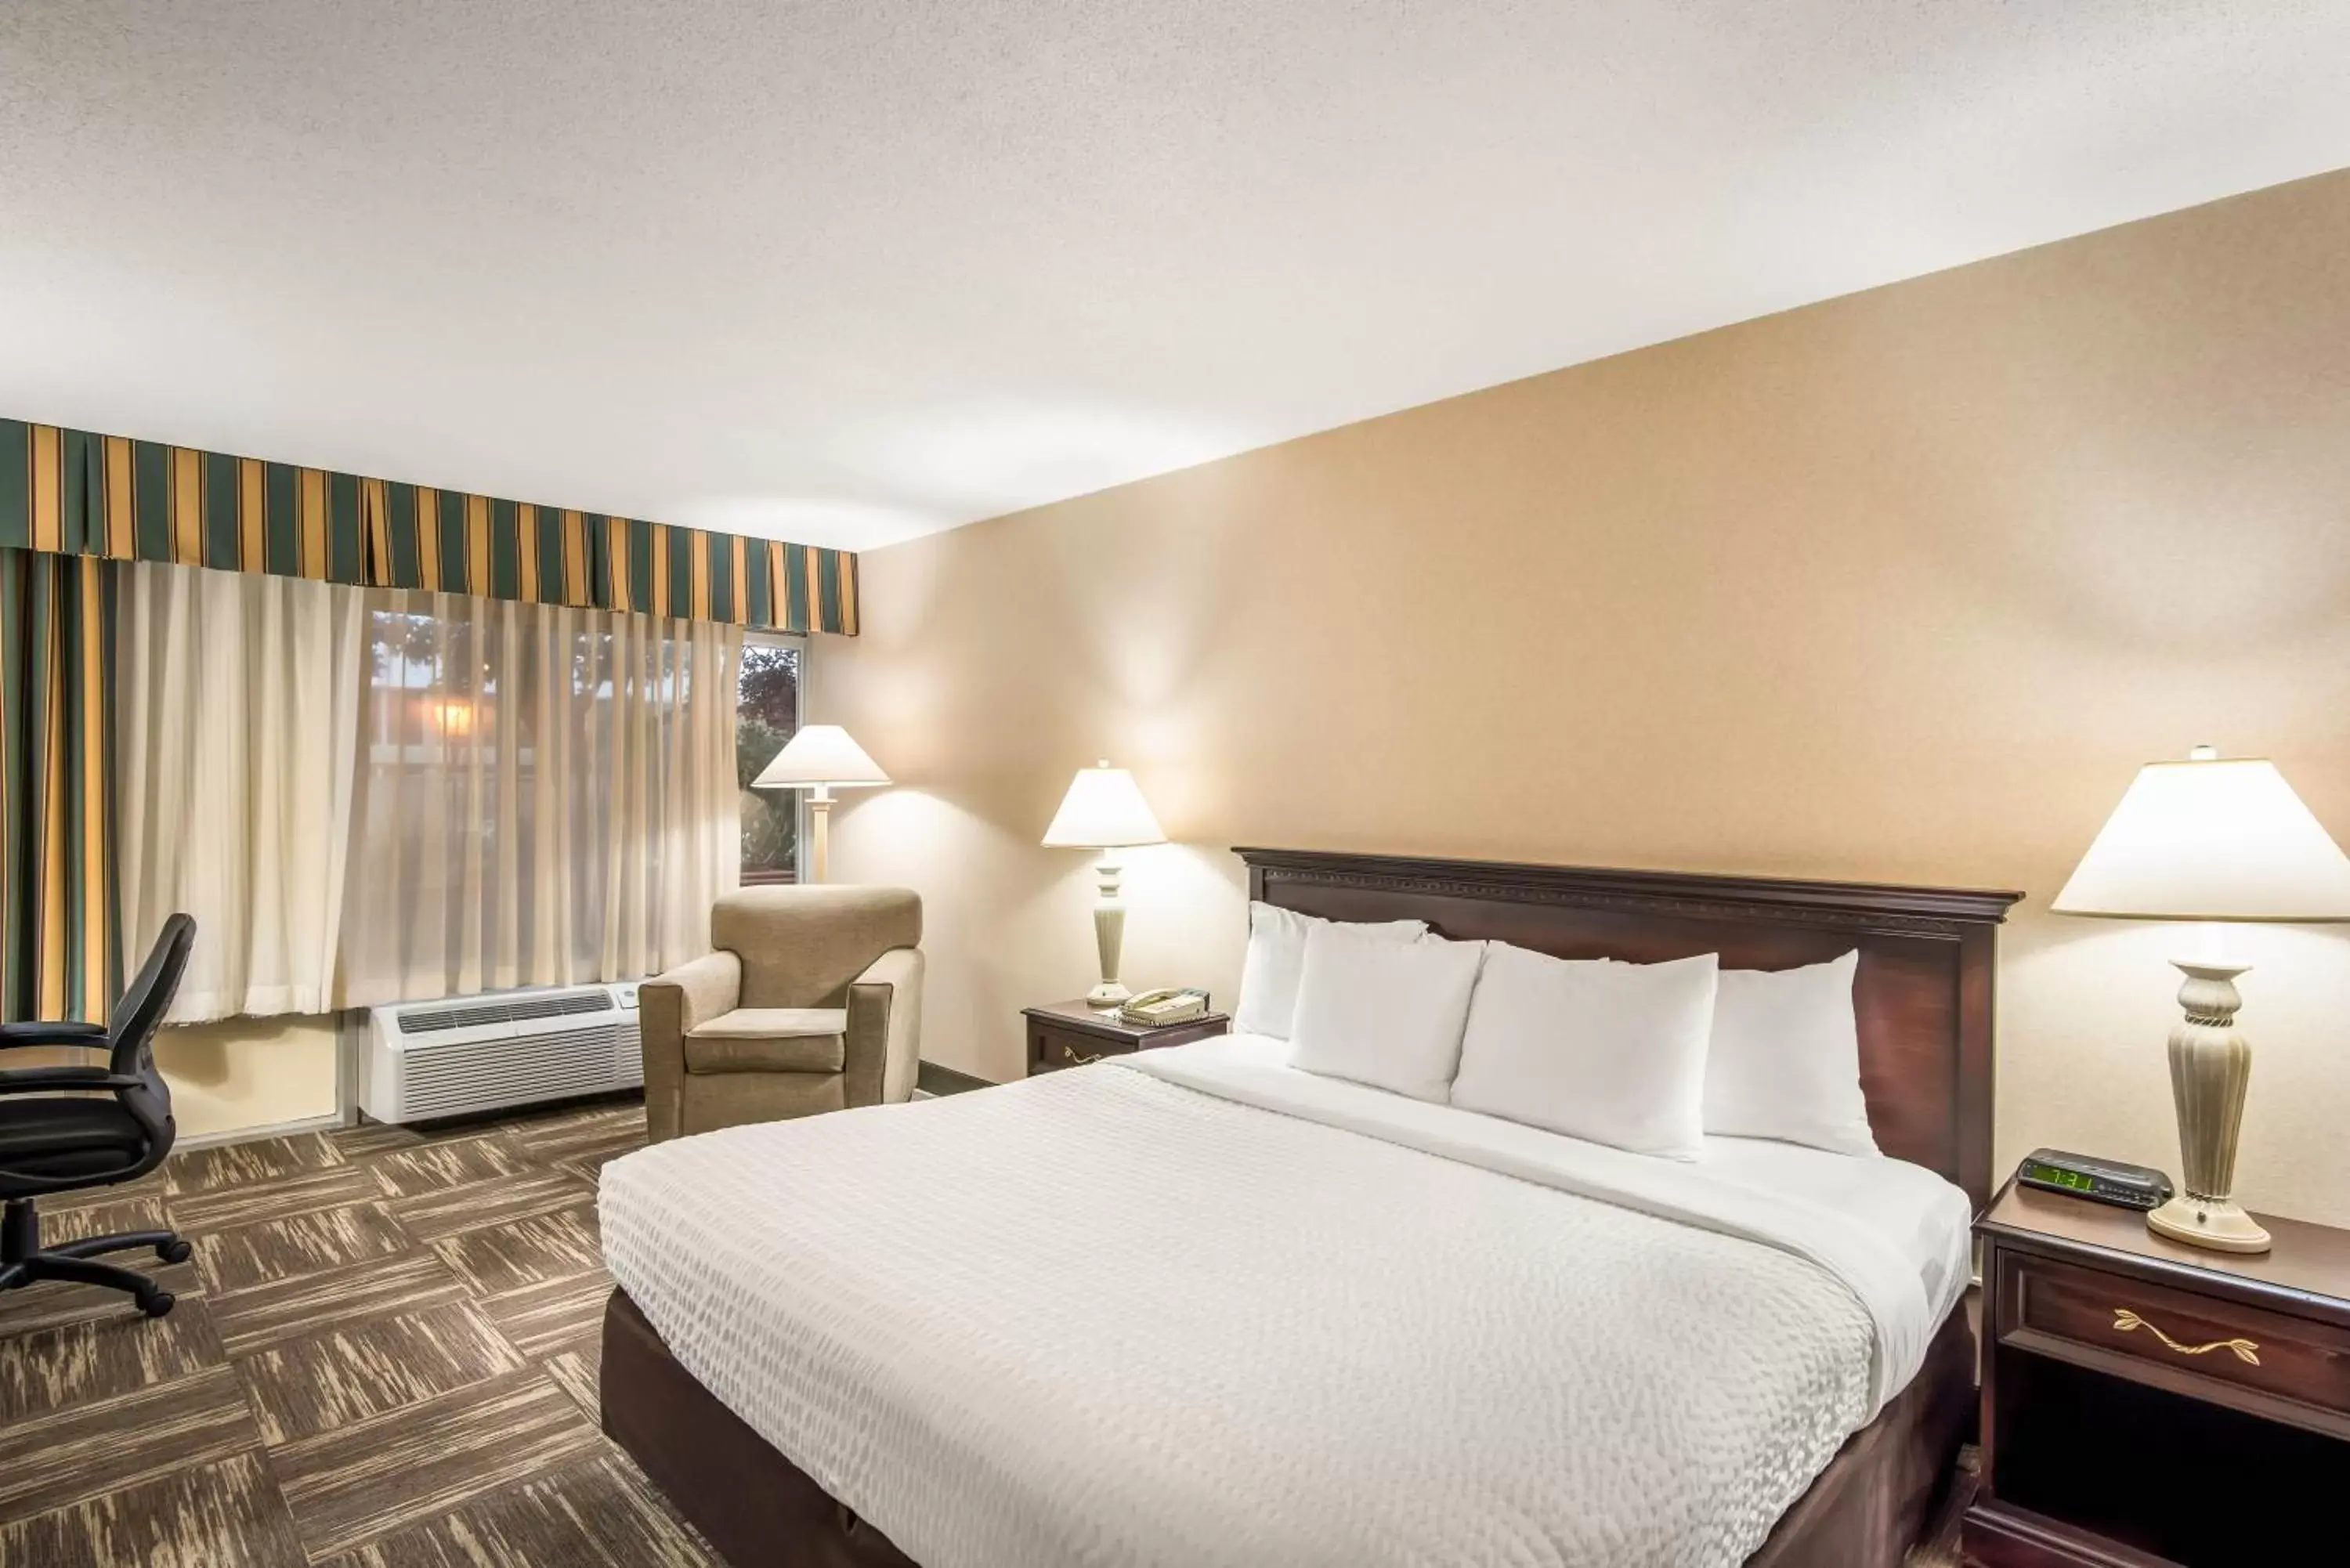 King Room - Non-Smoking/Pet Friendly in Clarion Inn Grand Junction